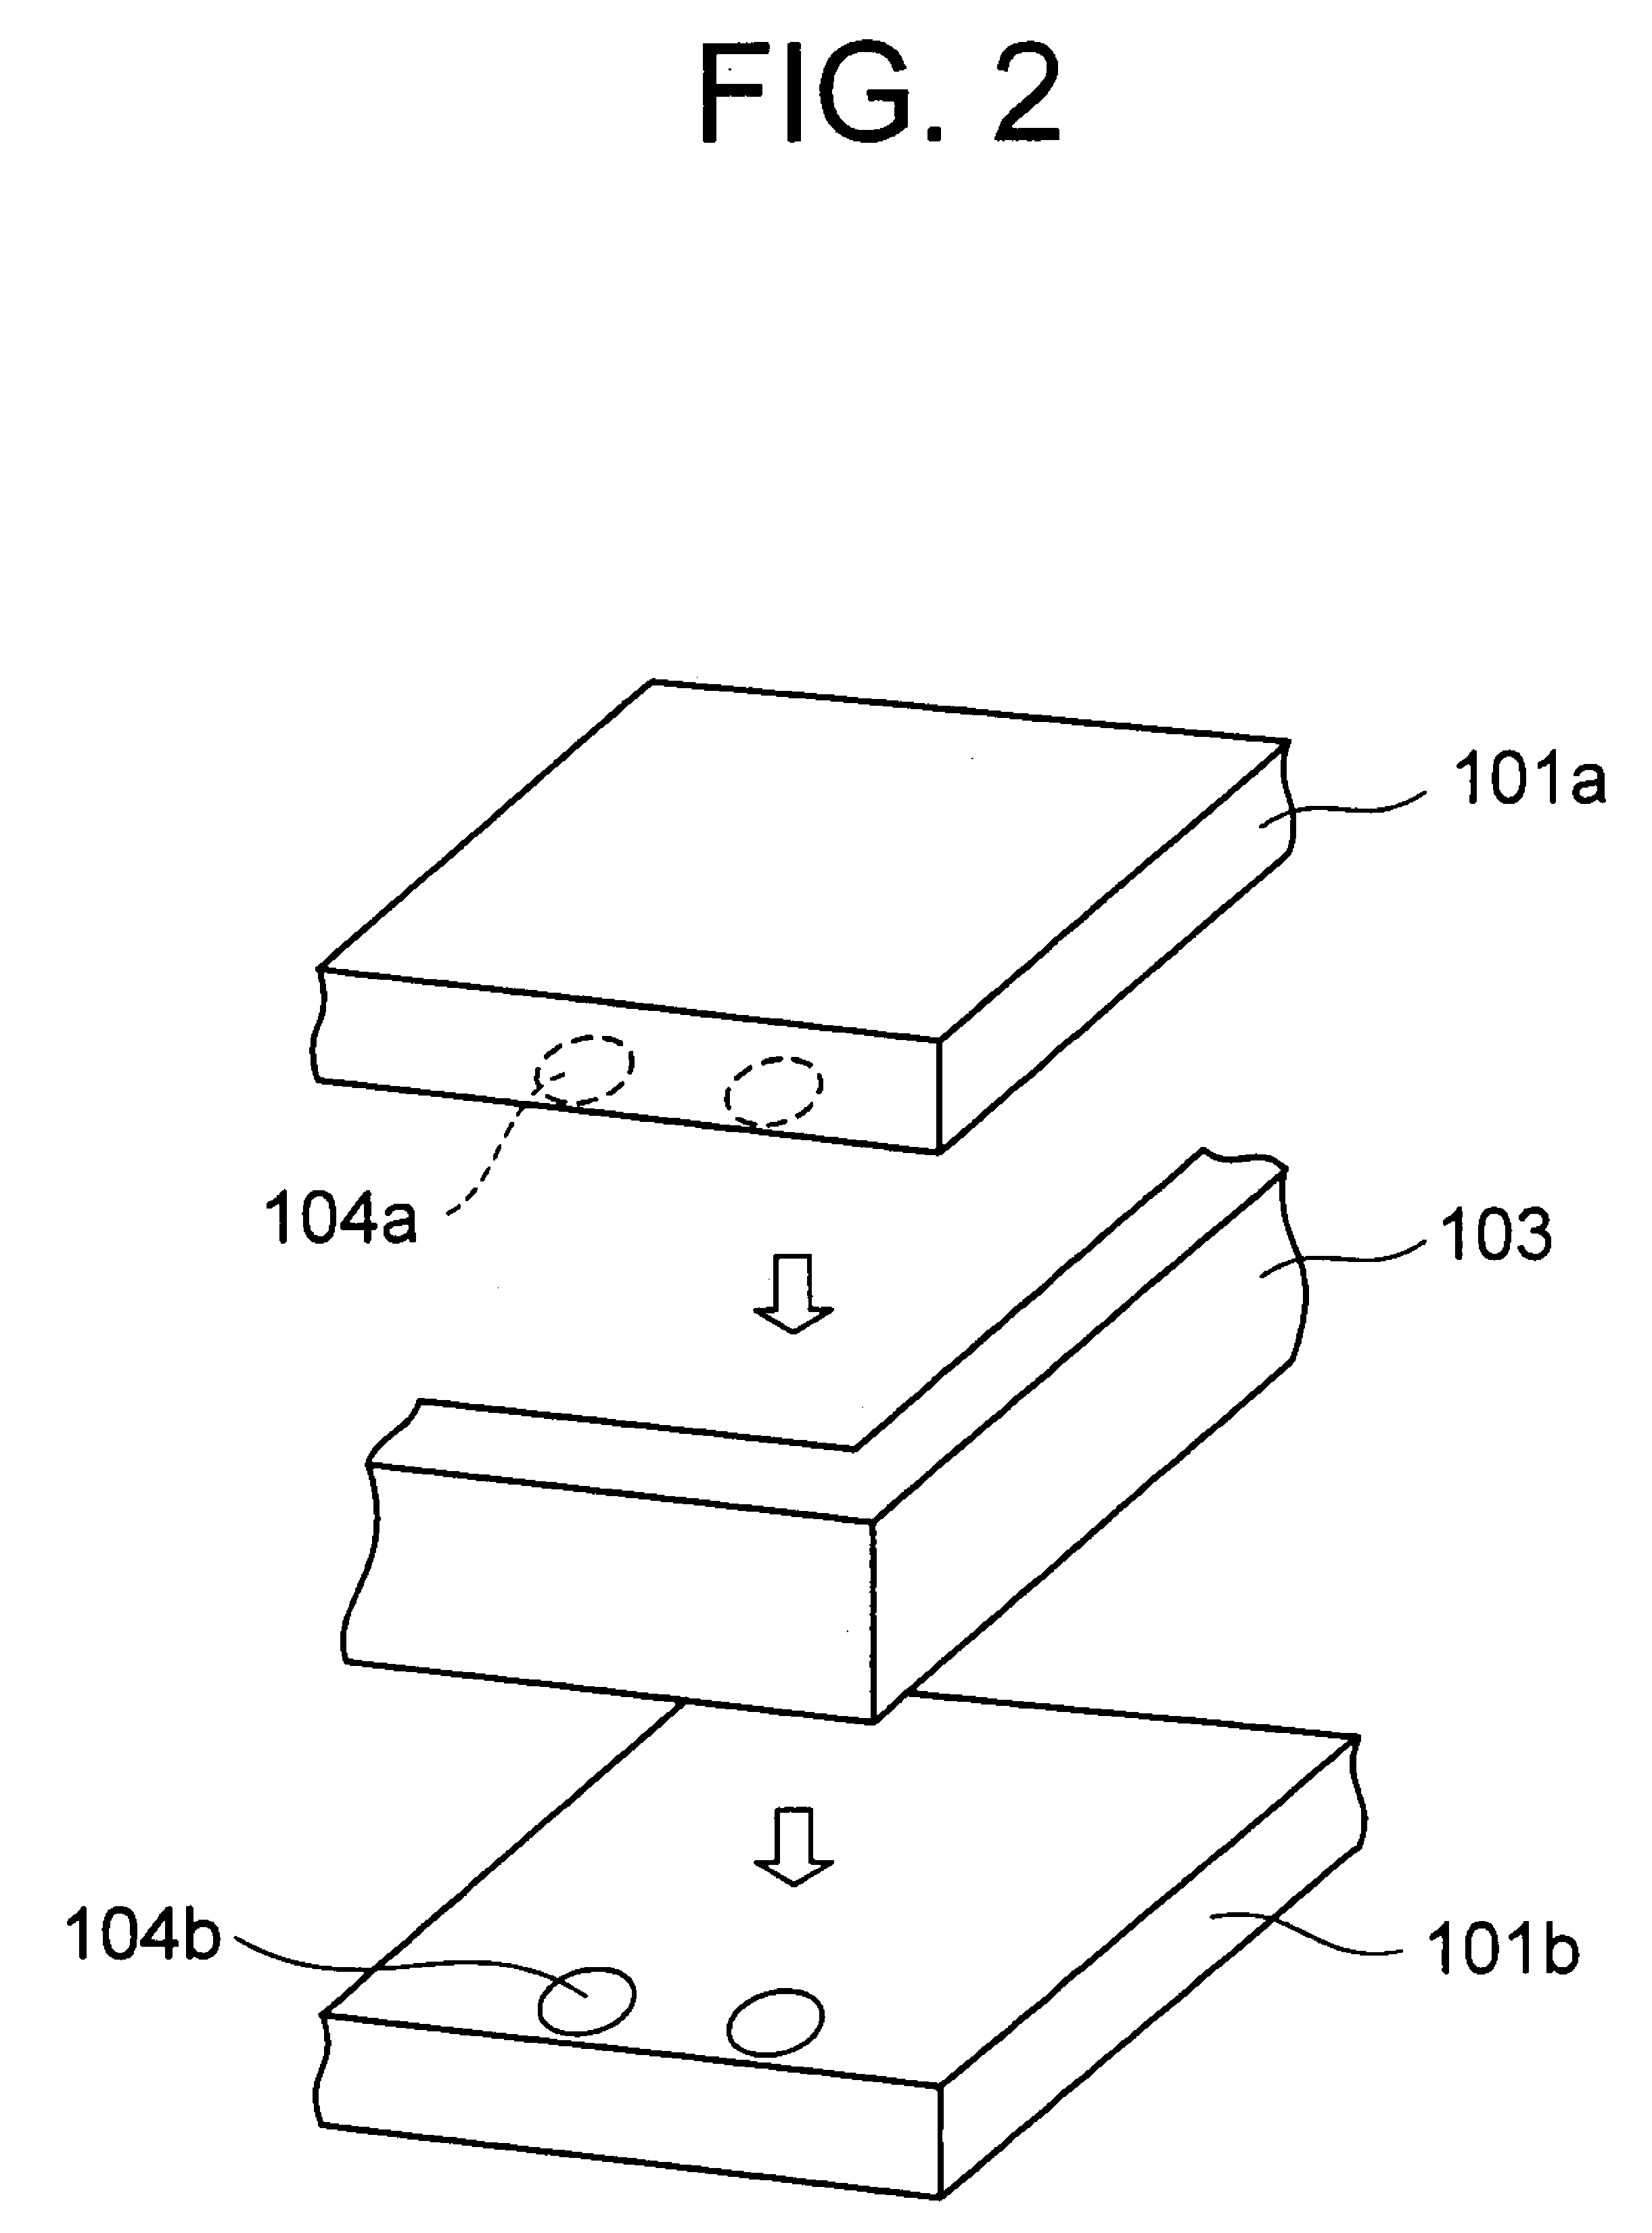 Stacked mounting structure